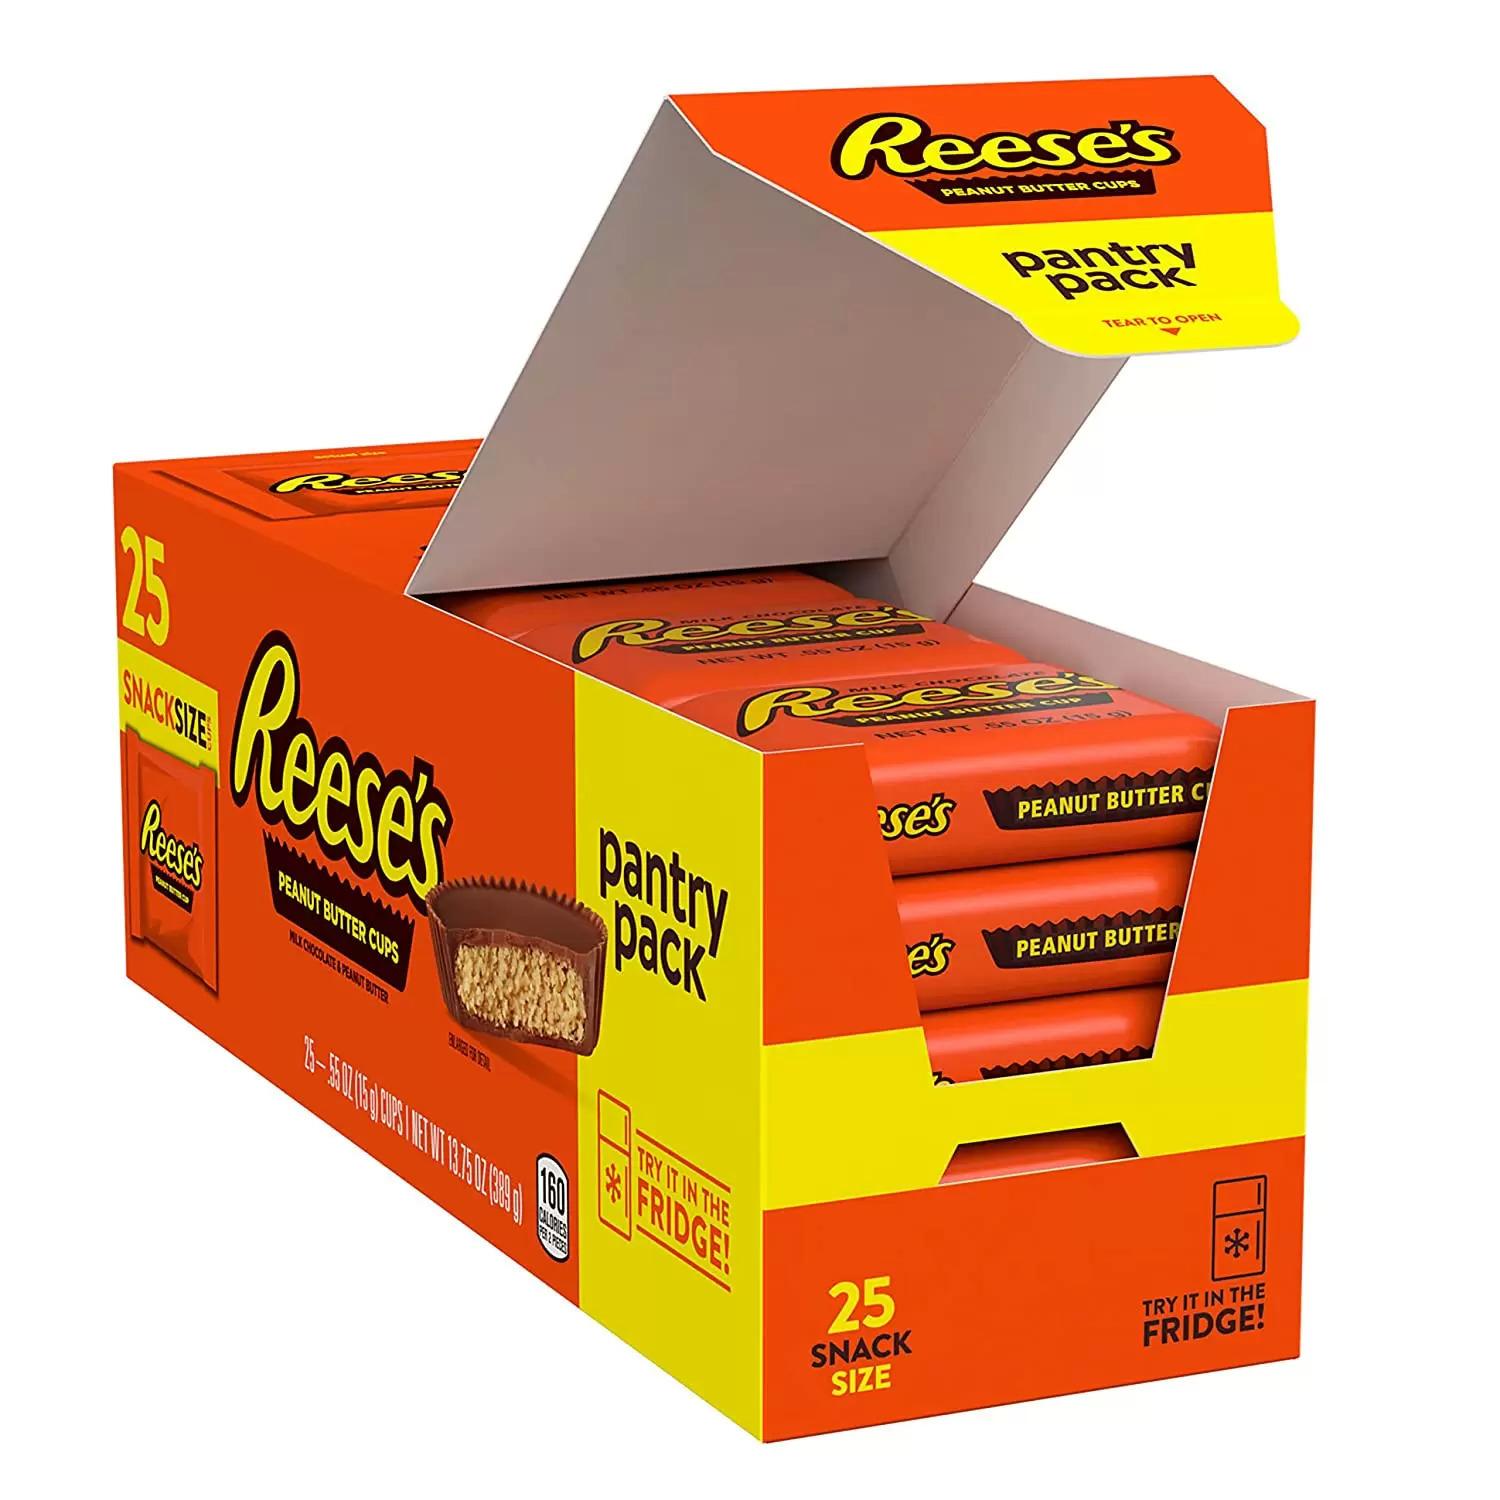 Reeses Milk Chocolate Peanut Butter Cups 25 Pack for $5.02 Shipped